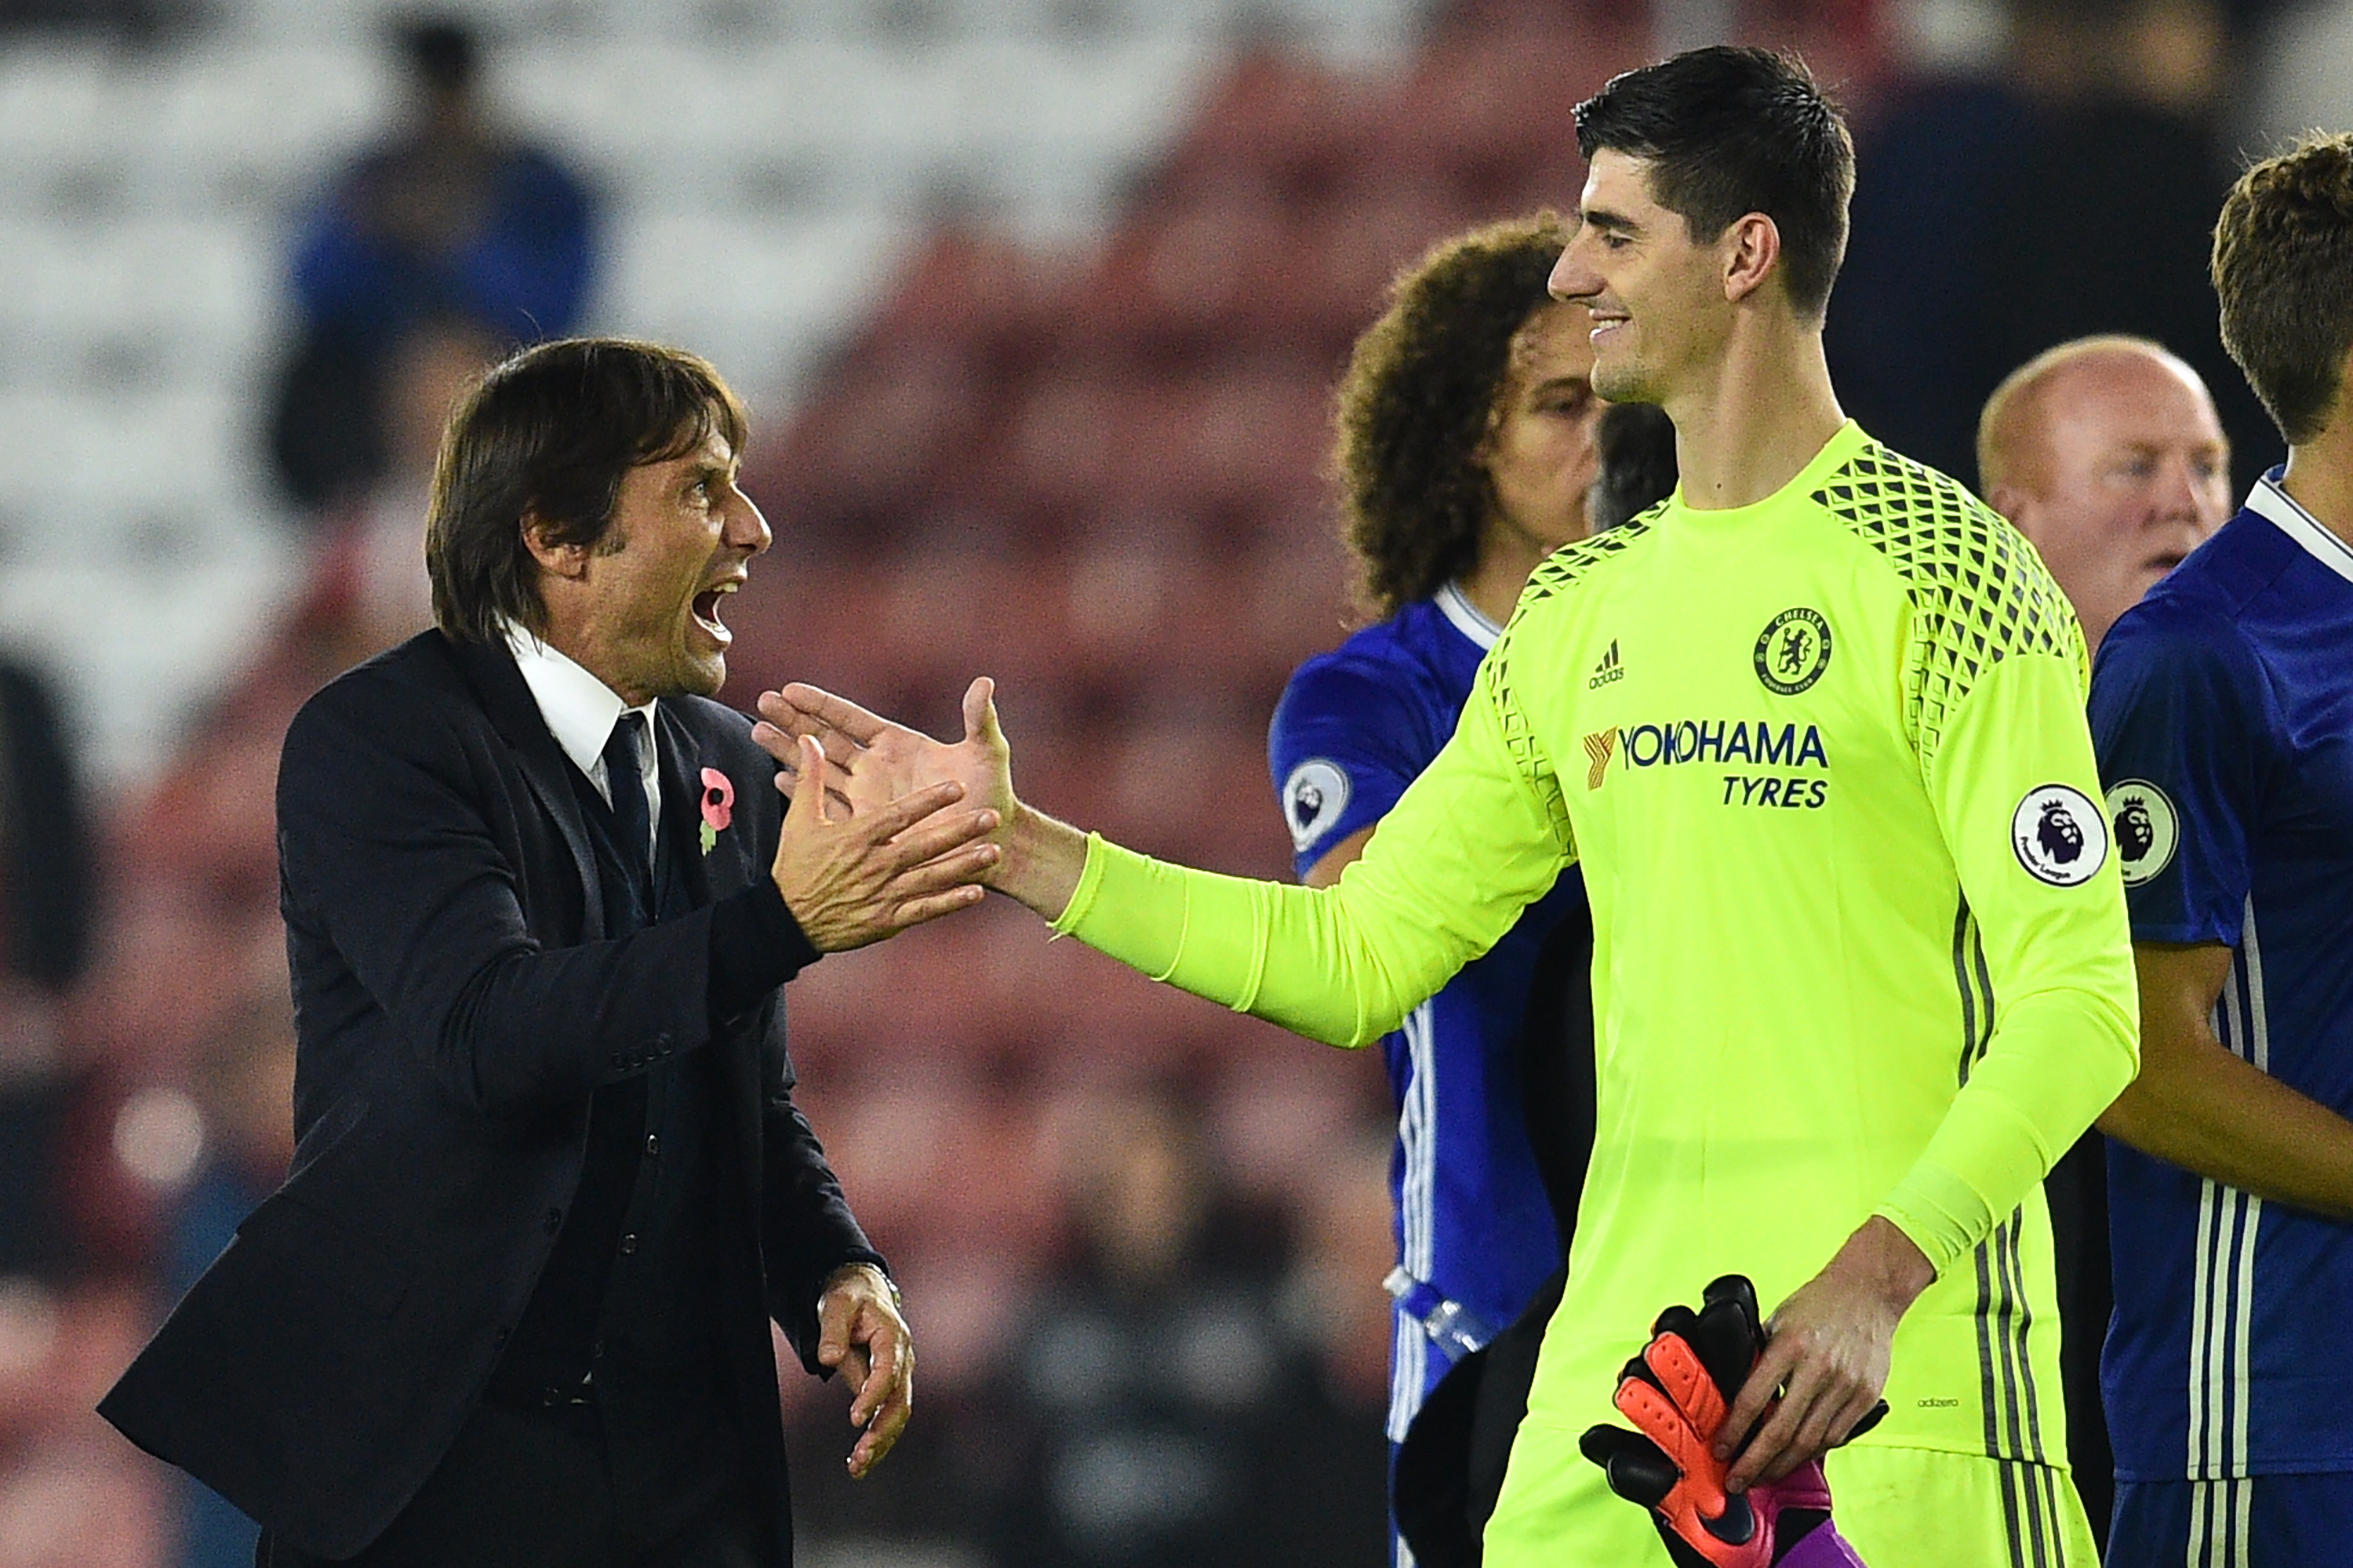 Chelsea's Italian head coach Antonio Conte (L) celebrates with Chelsea's Belgian goalkeeper Thibaut Courtois on the pitch after the English Premier League football match between Southampton and Chelsea at St Mary's Stadium in Southampton, southern England on October 30, 2016.
Chelsea won the game 2-0. / AFP / GLYN KIRK / RESTRICTED TO EDITORIAL USE. No use with unauthorized audio, video, data, fixture lists, club/league logos or 'live' services. Online in-match use limited to 75 images, no video emulation. No use in betting, games or single club/league/player publications.  /         (Photo credit should read GLYN KIRK/AFP/Getty Images)